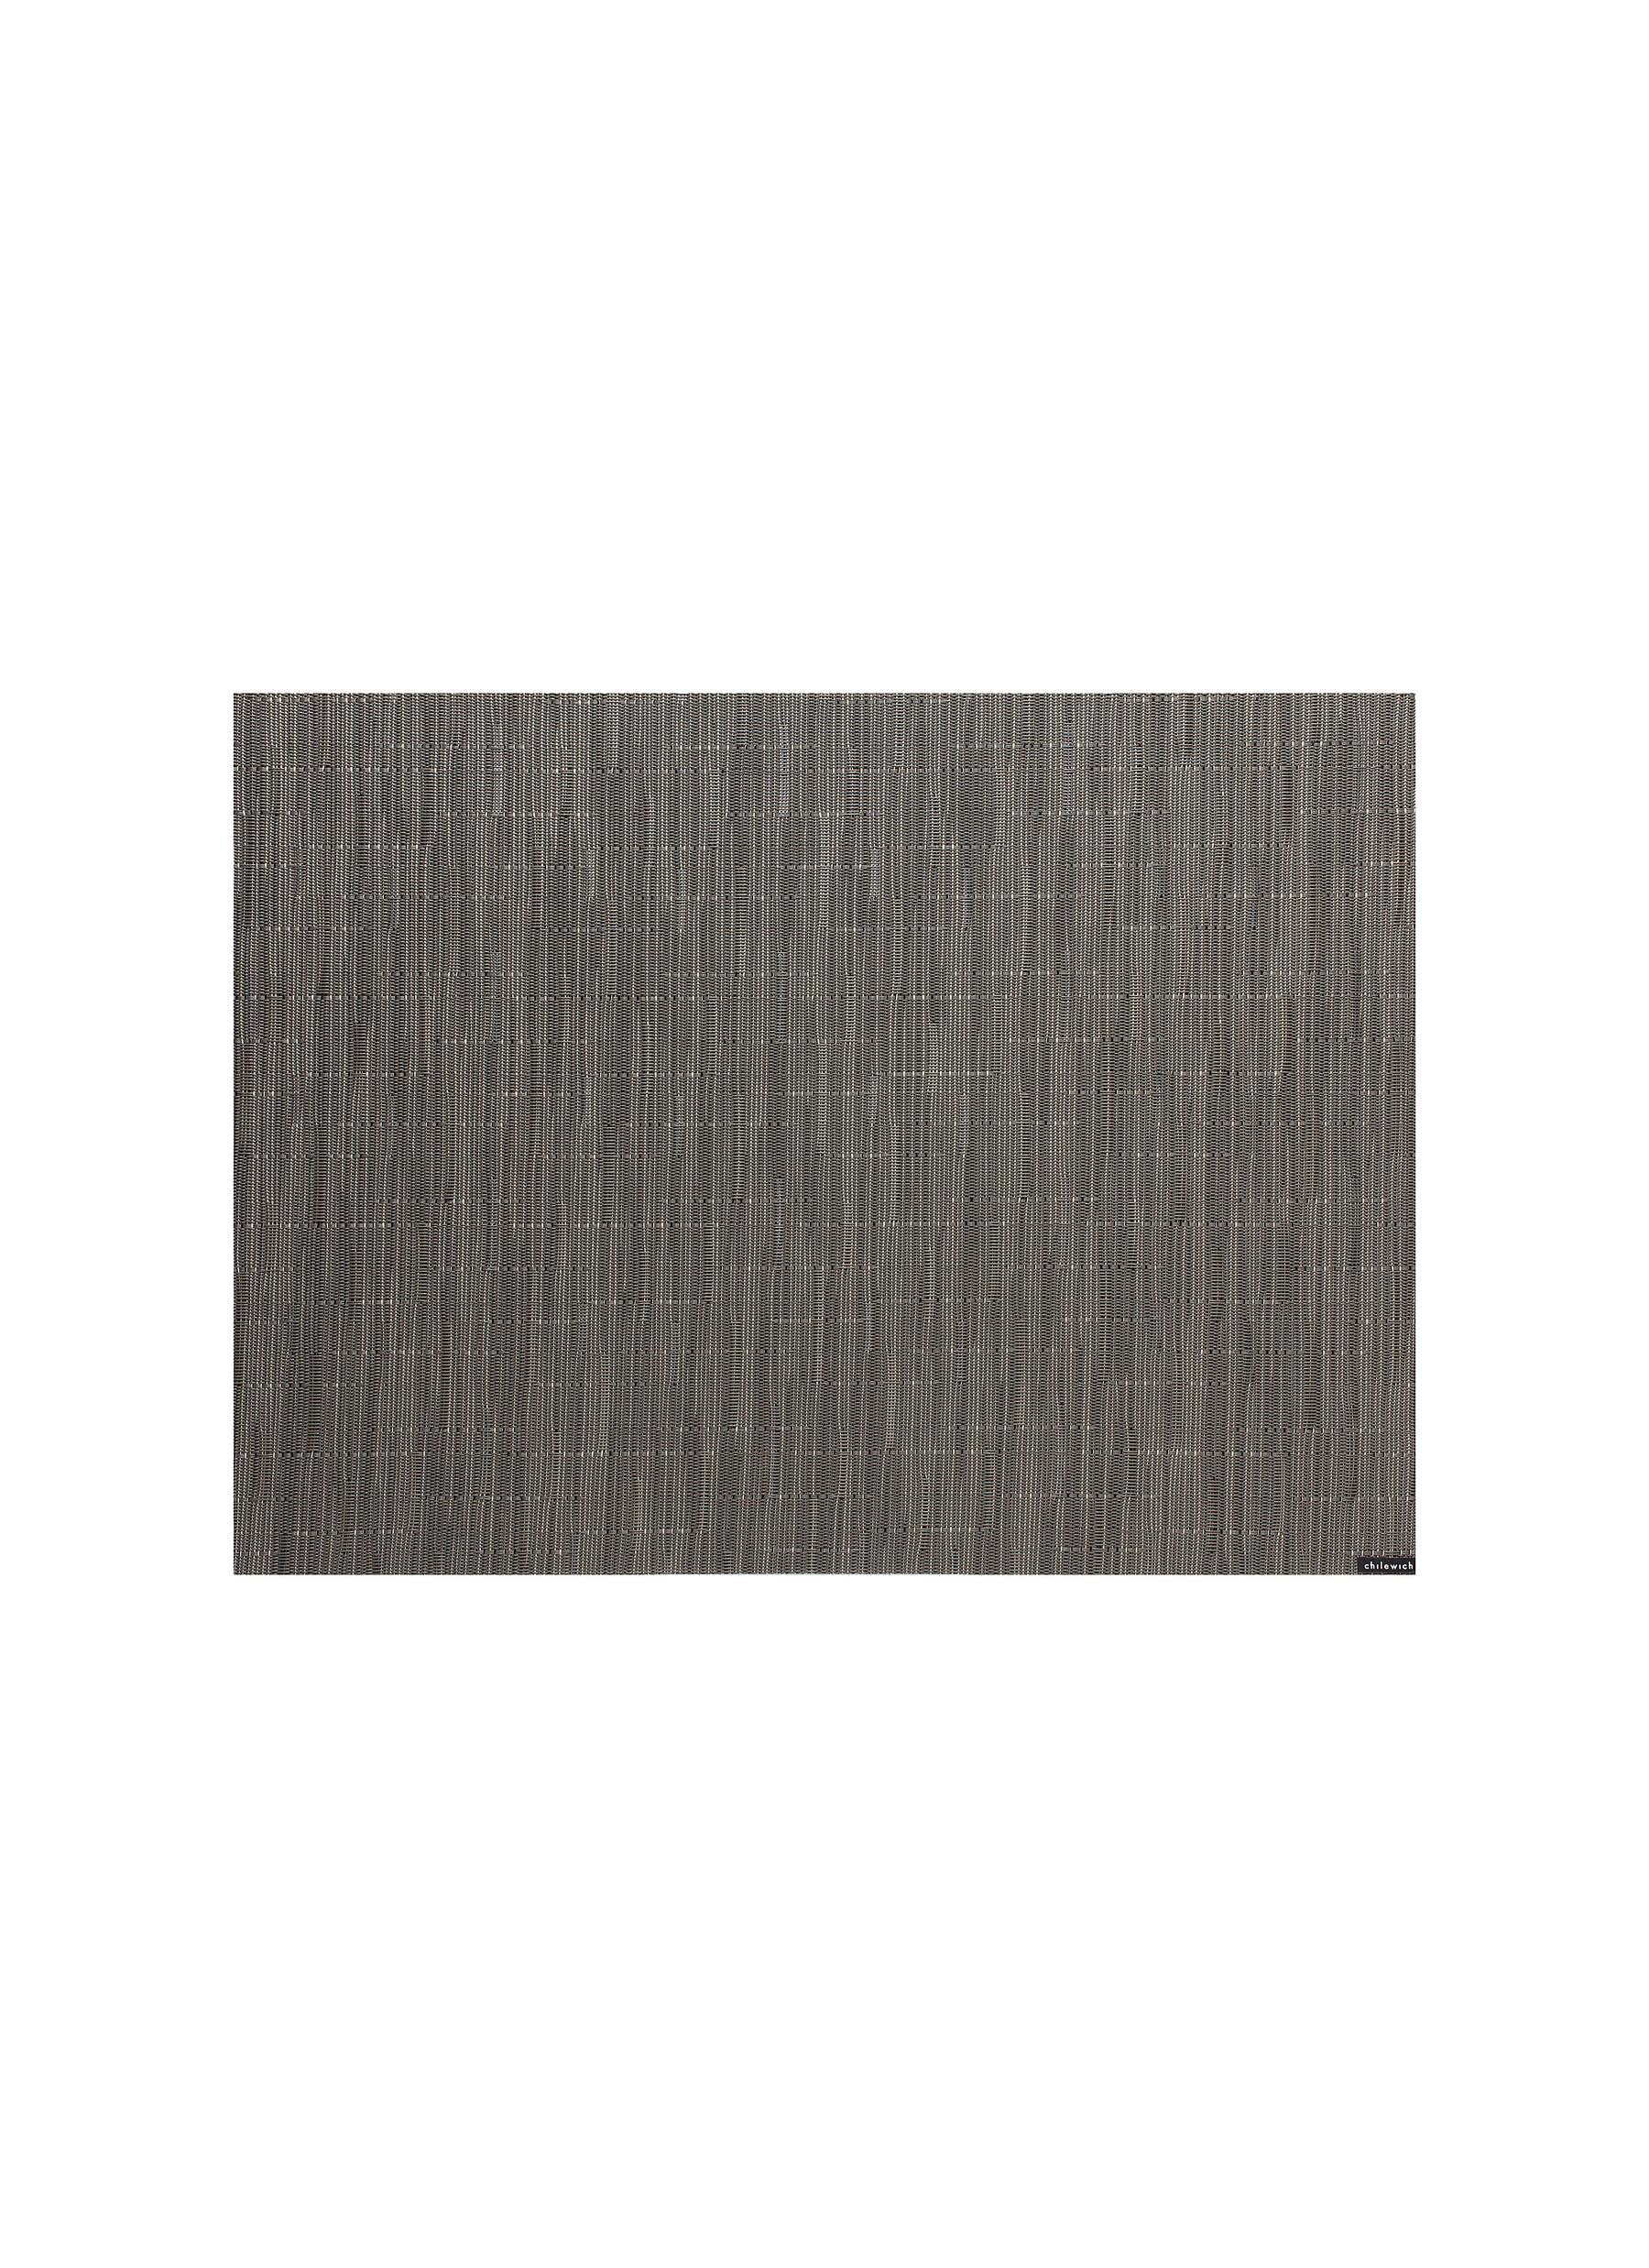 BAMBOO RECTANGLE PLACEMAT - GREY FLANNEL